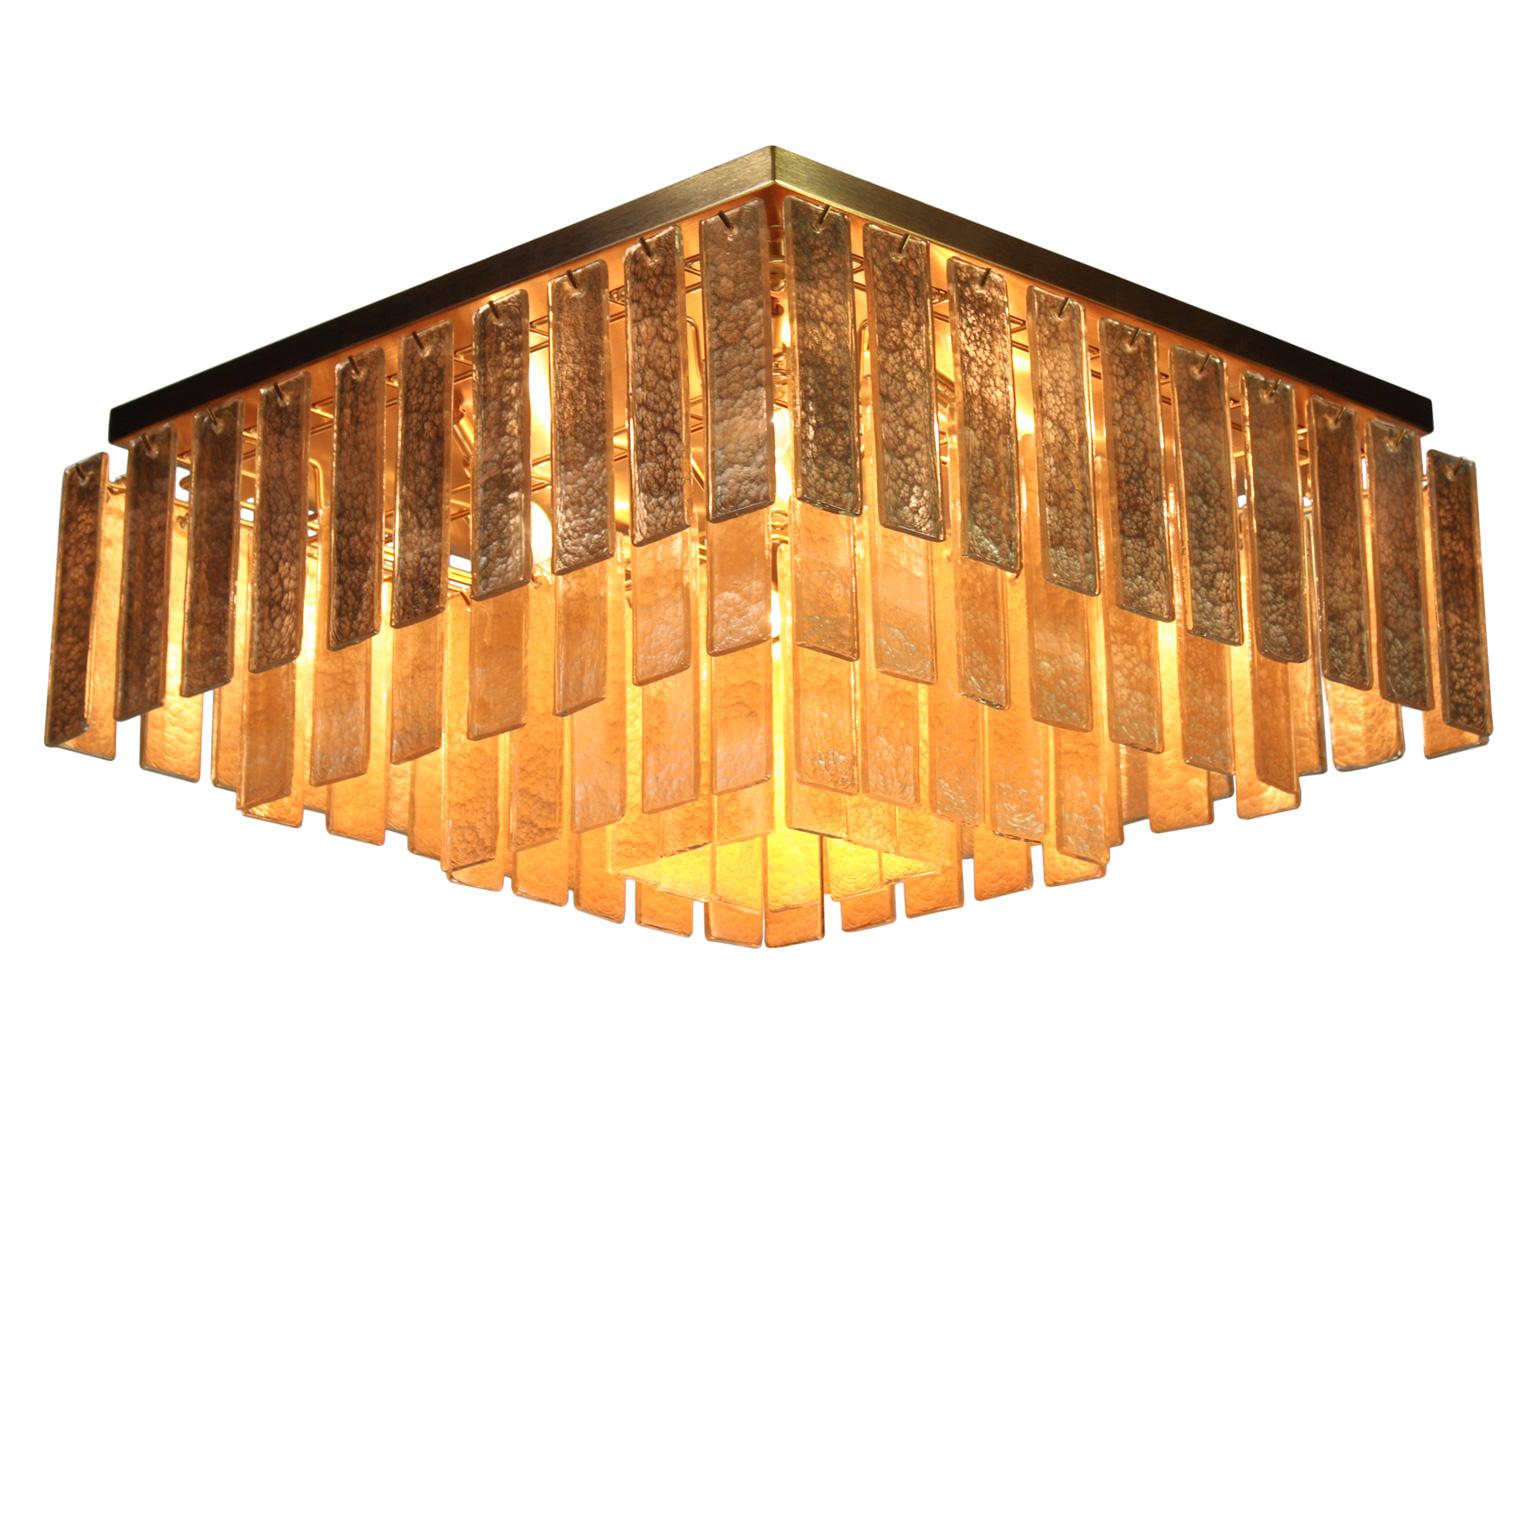 Charleston ceiling light with gold color glass listels, brushed gold fixture by Multiforme.
The modern style ceiling light Charleston, from our Progressive collection, is an extremely versatile lighting work that can be customized in many different